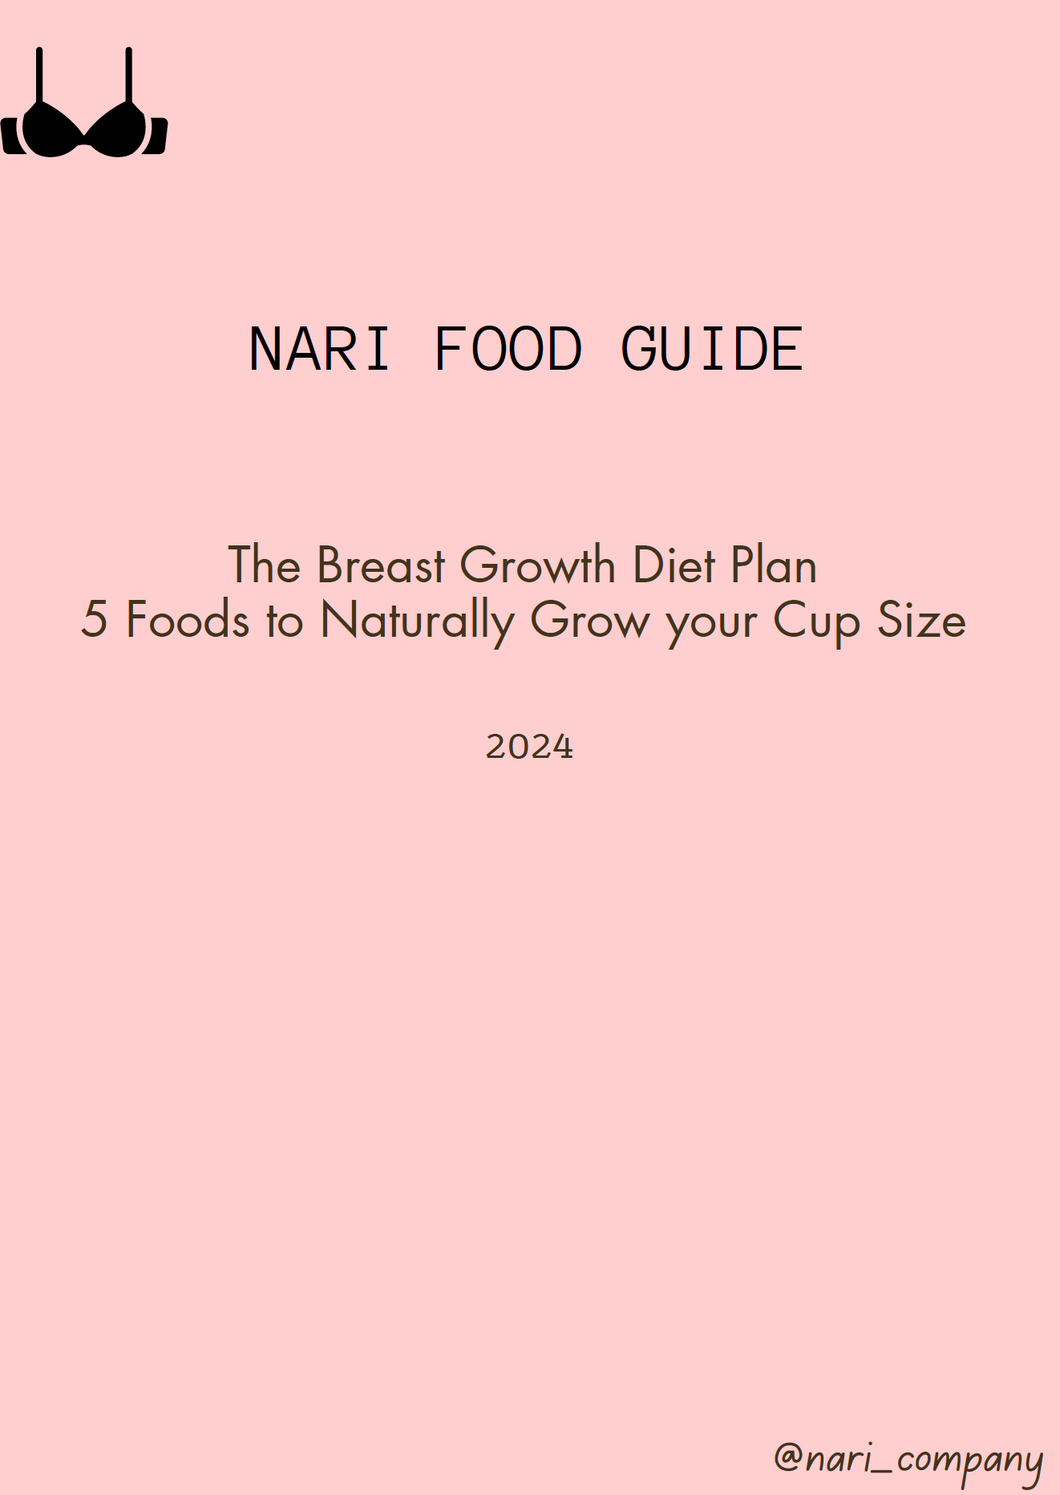 The Breast Growth Diet Plan: 5 Foods to Naturally Grow your Cup Size